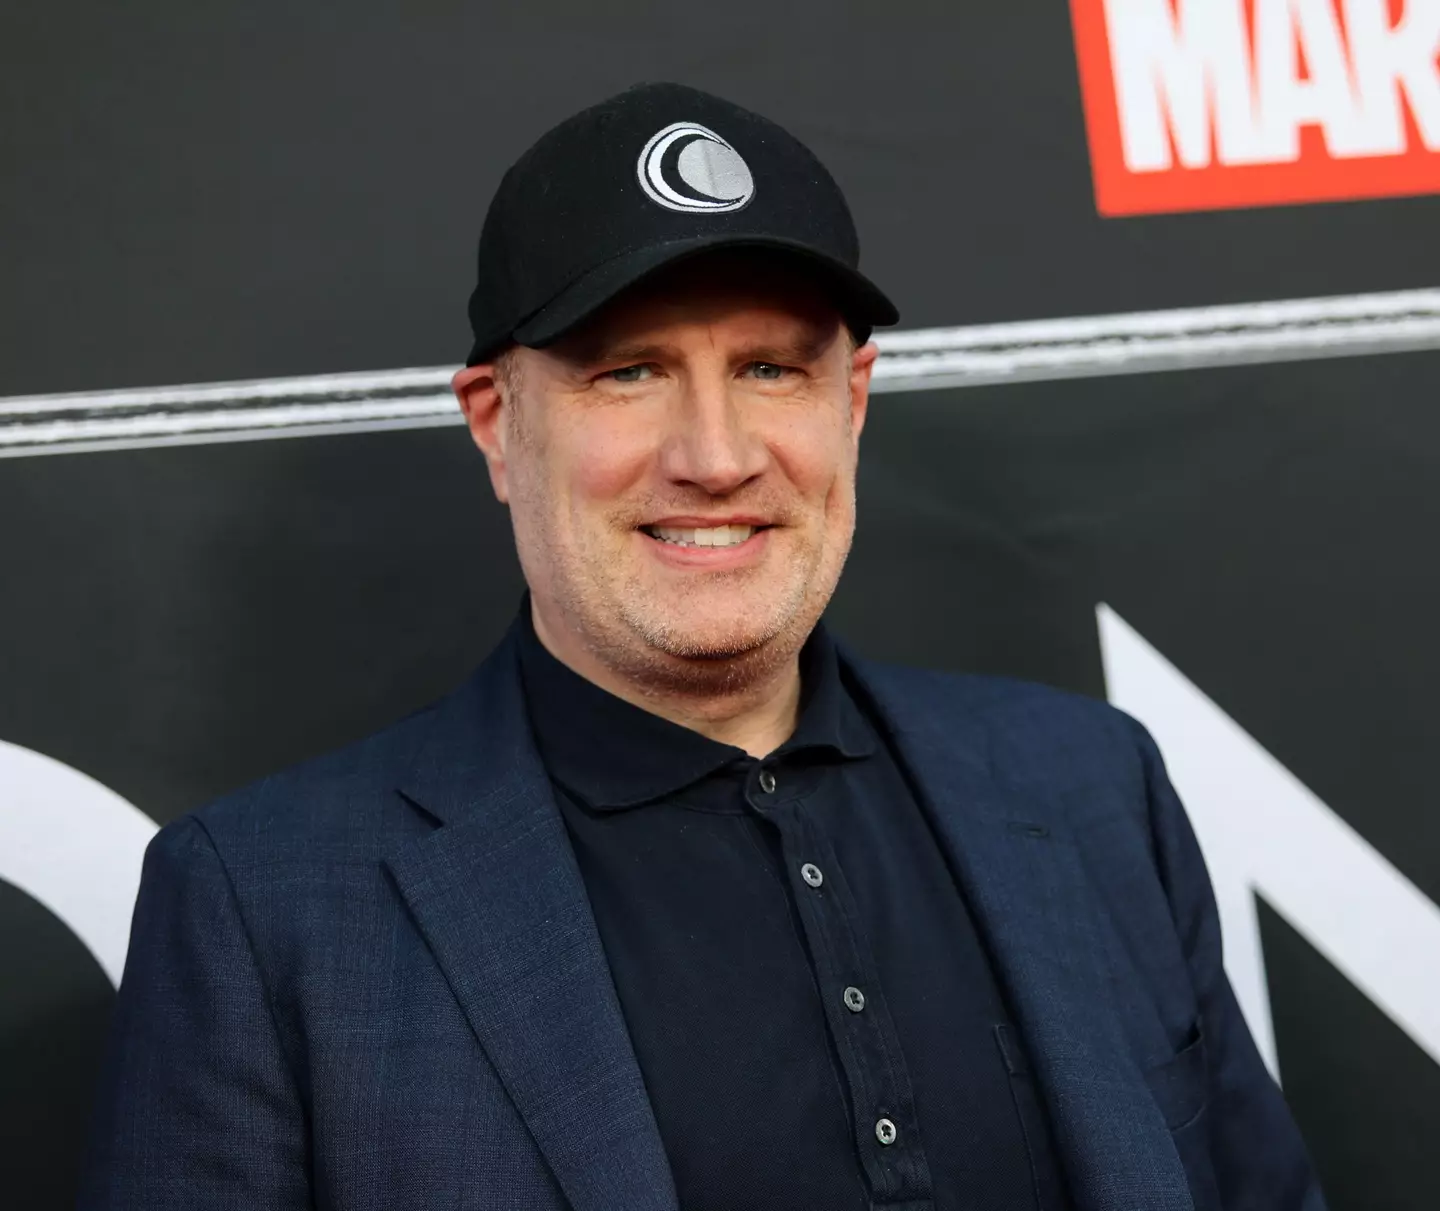 Kevin Feige revealed there would be at least three movies in the Phase 6 category.